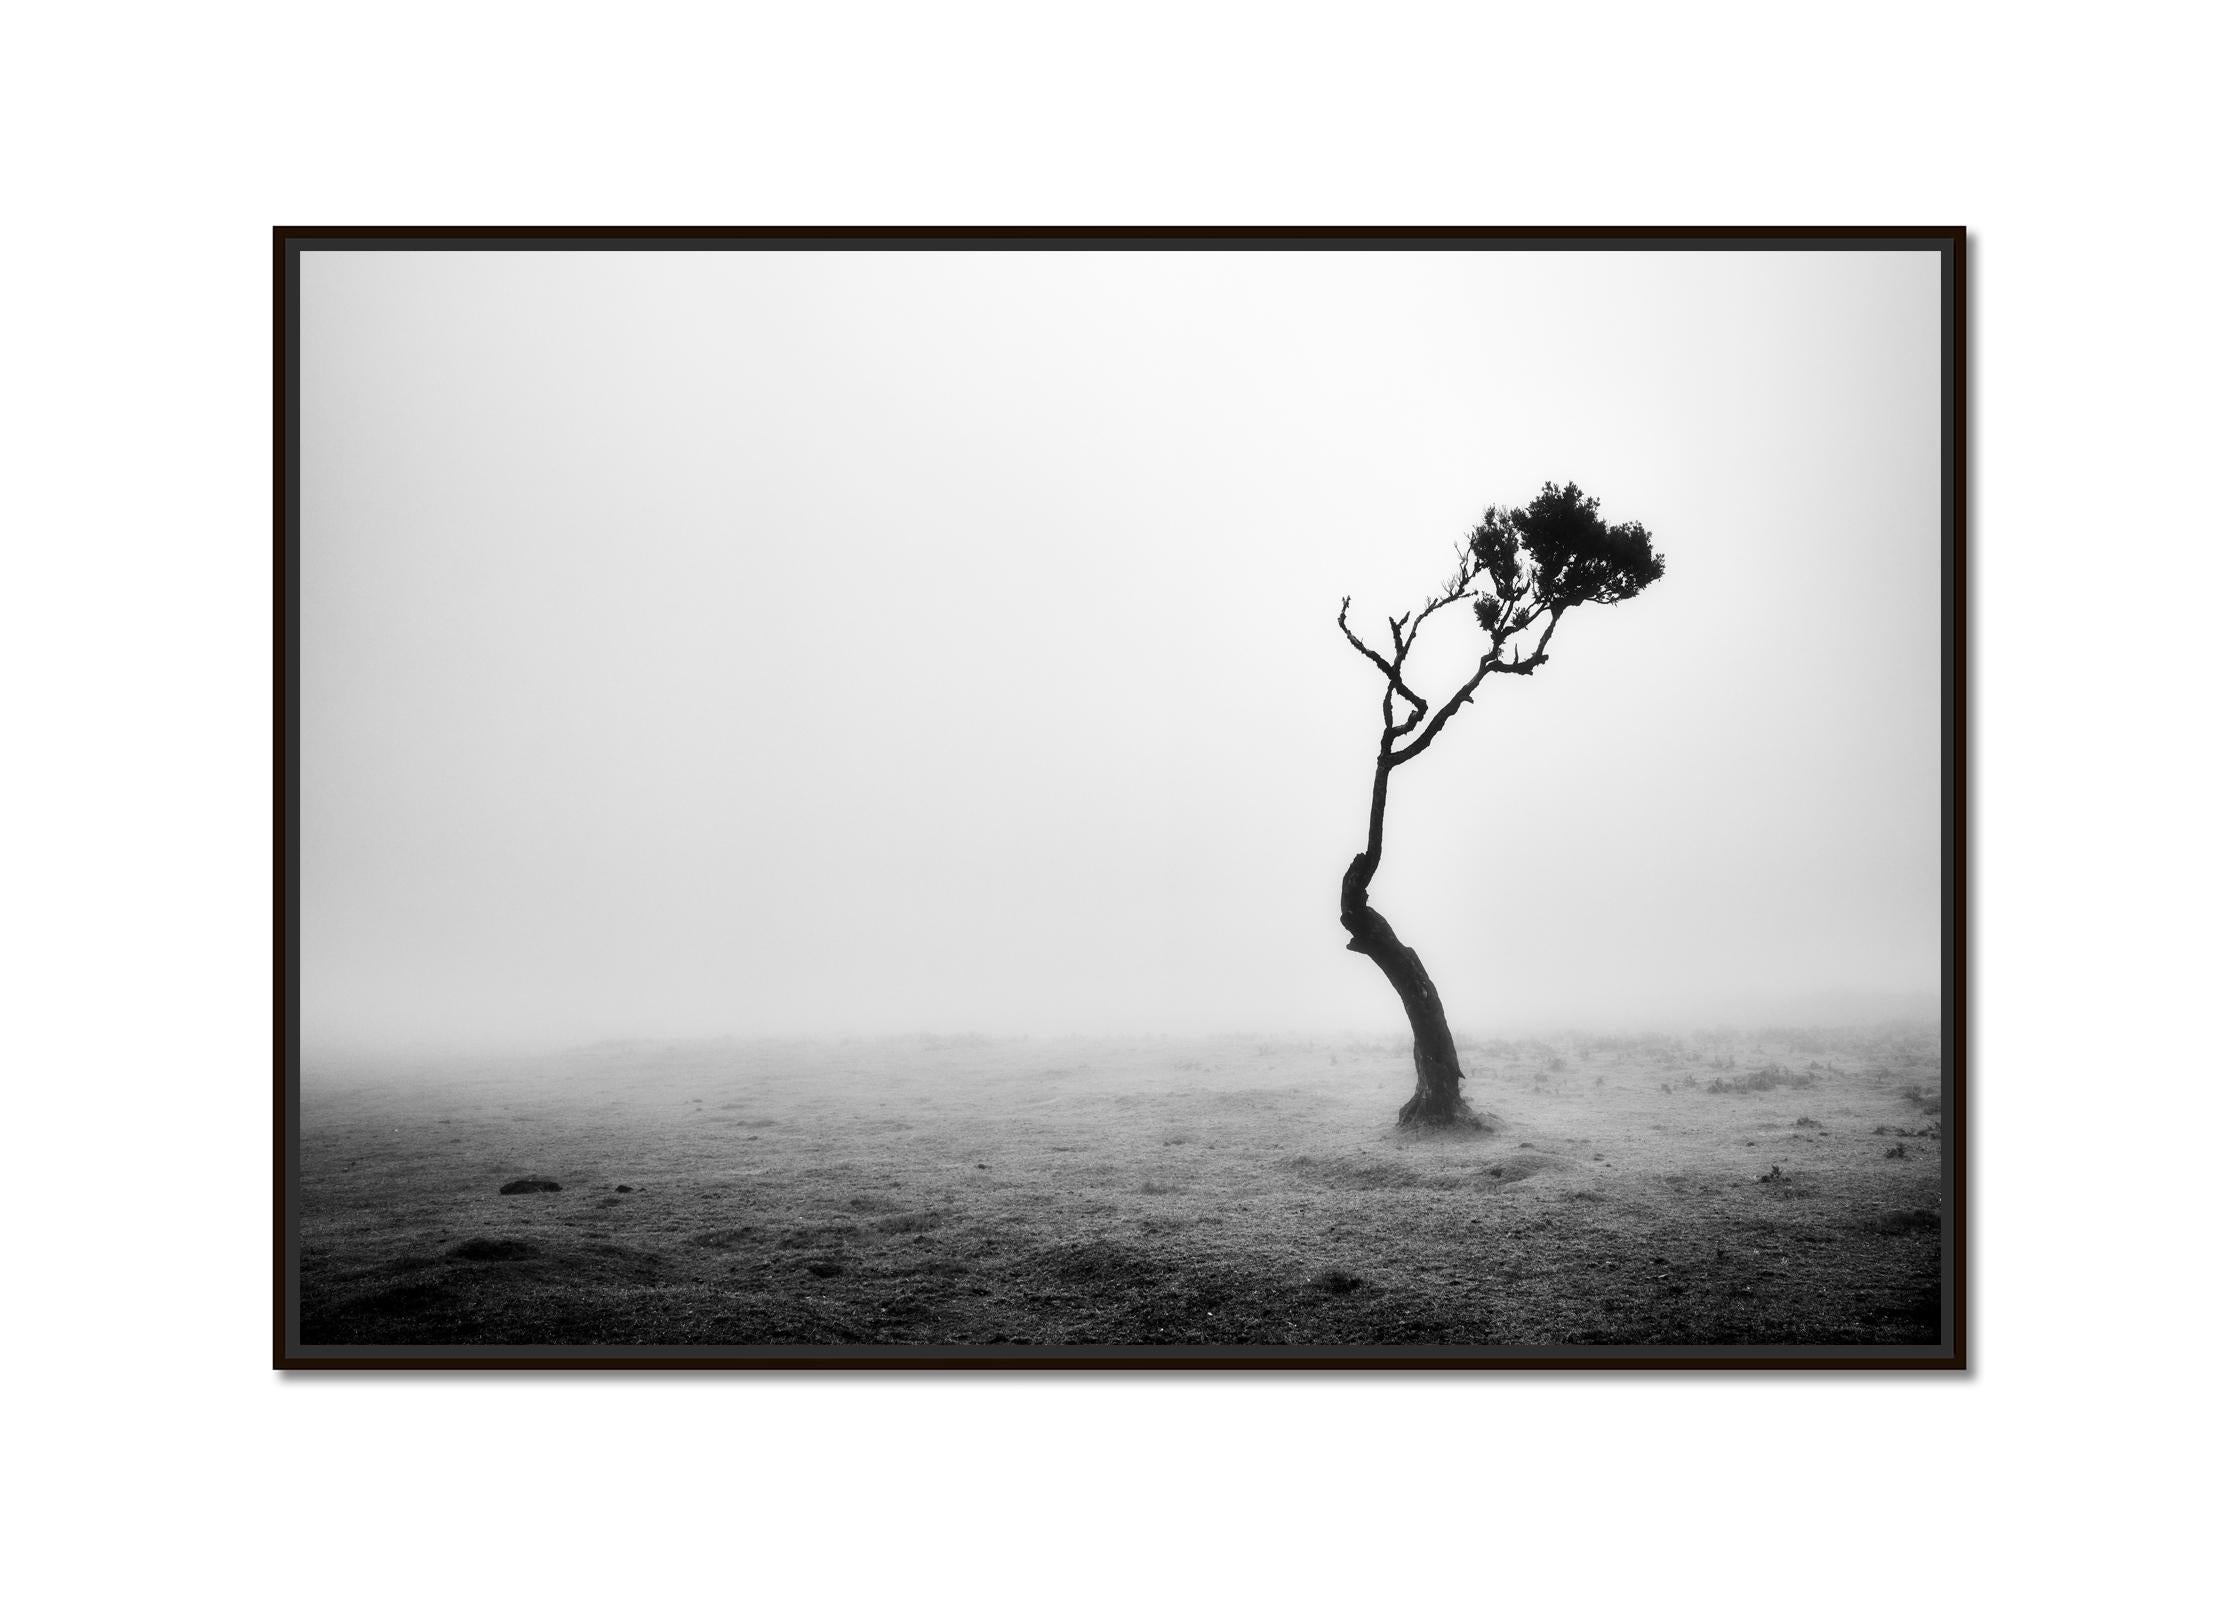 Lonely tree in the Fog, Madeira, Portugal, black and white photography landscape - Photograph by Gerald Berghammer